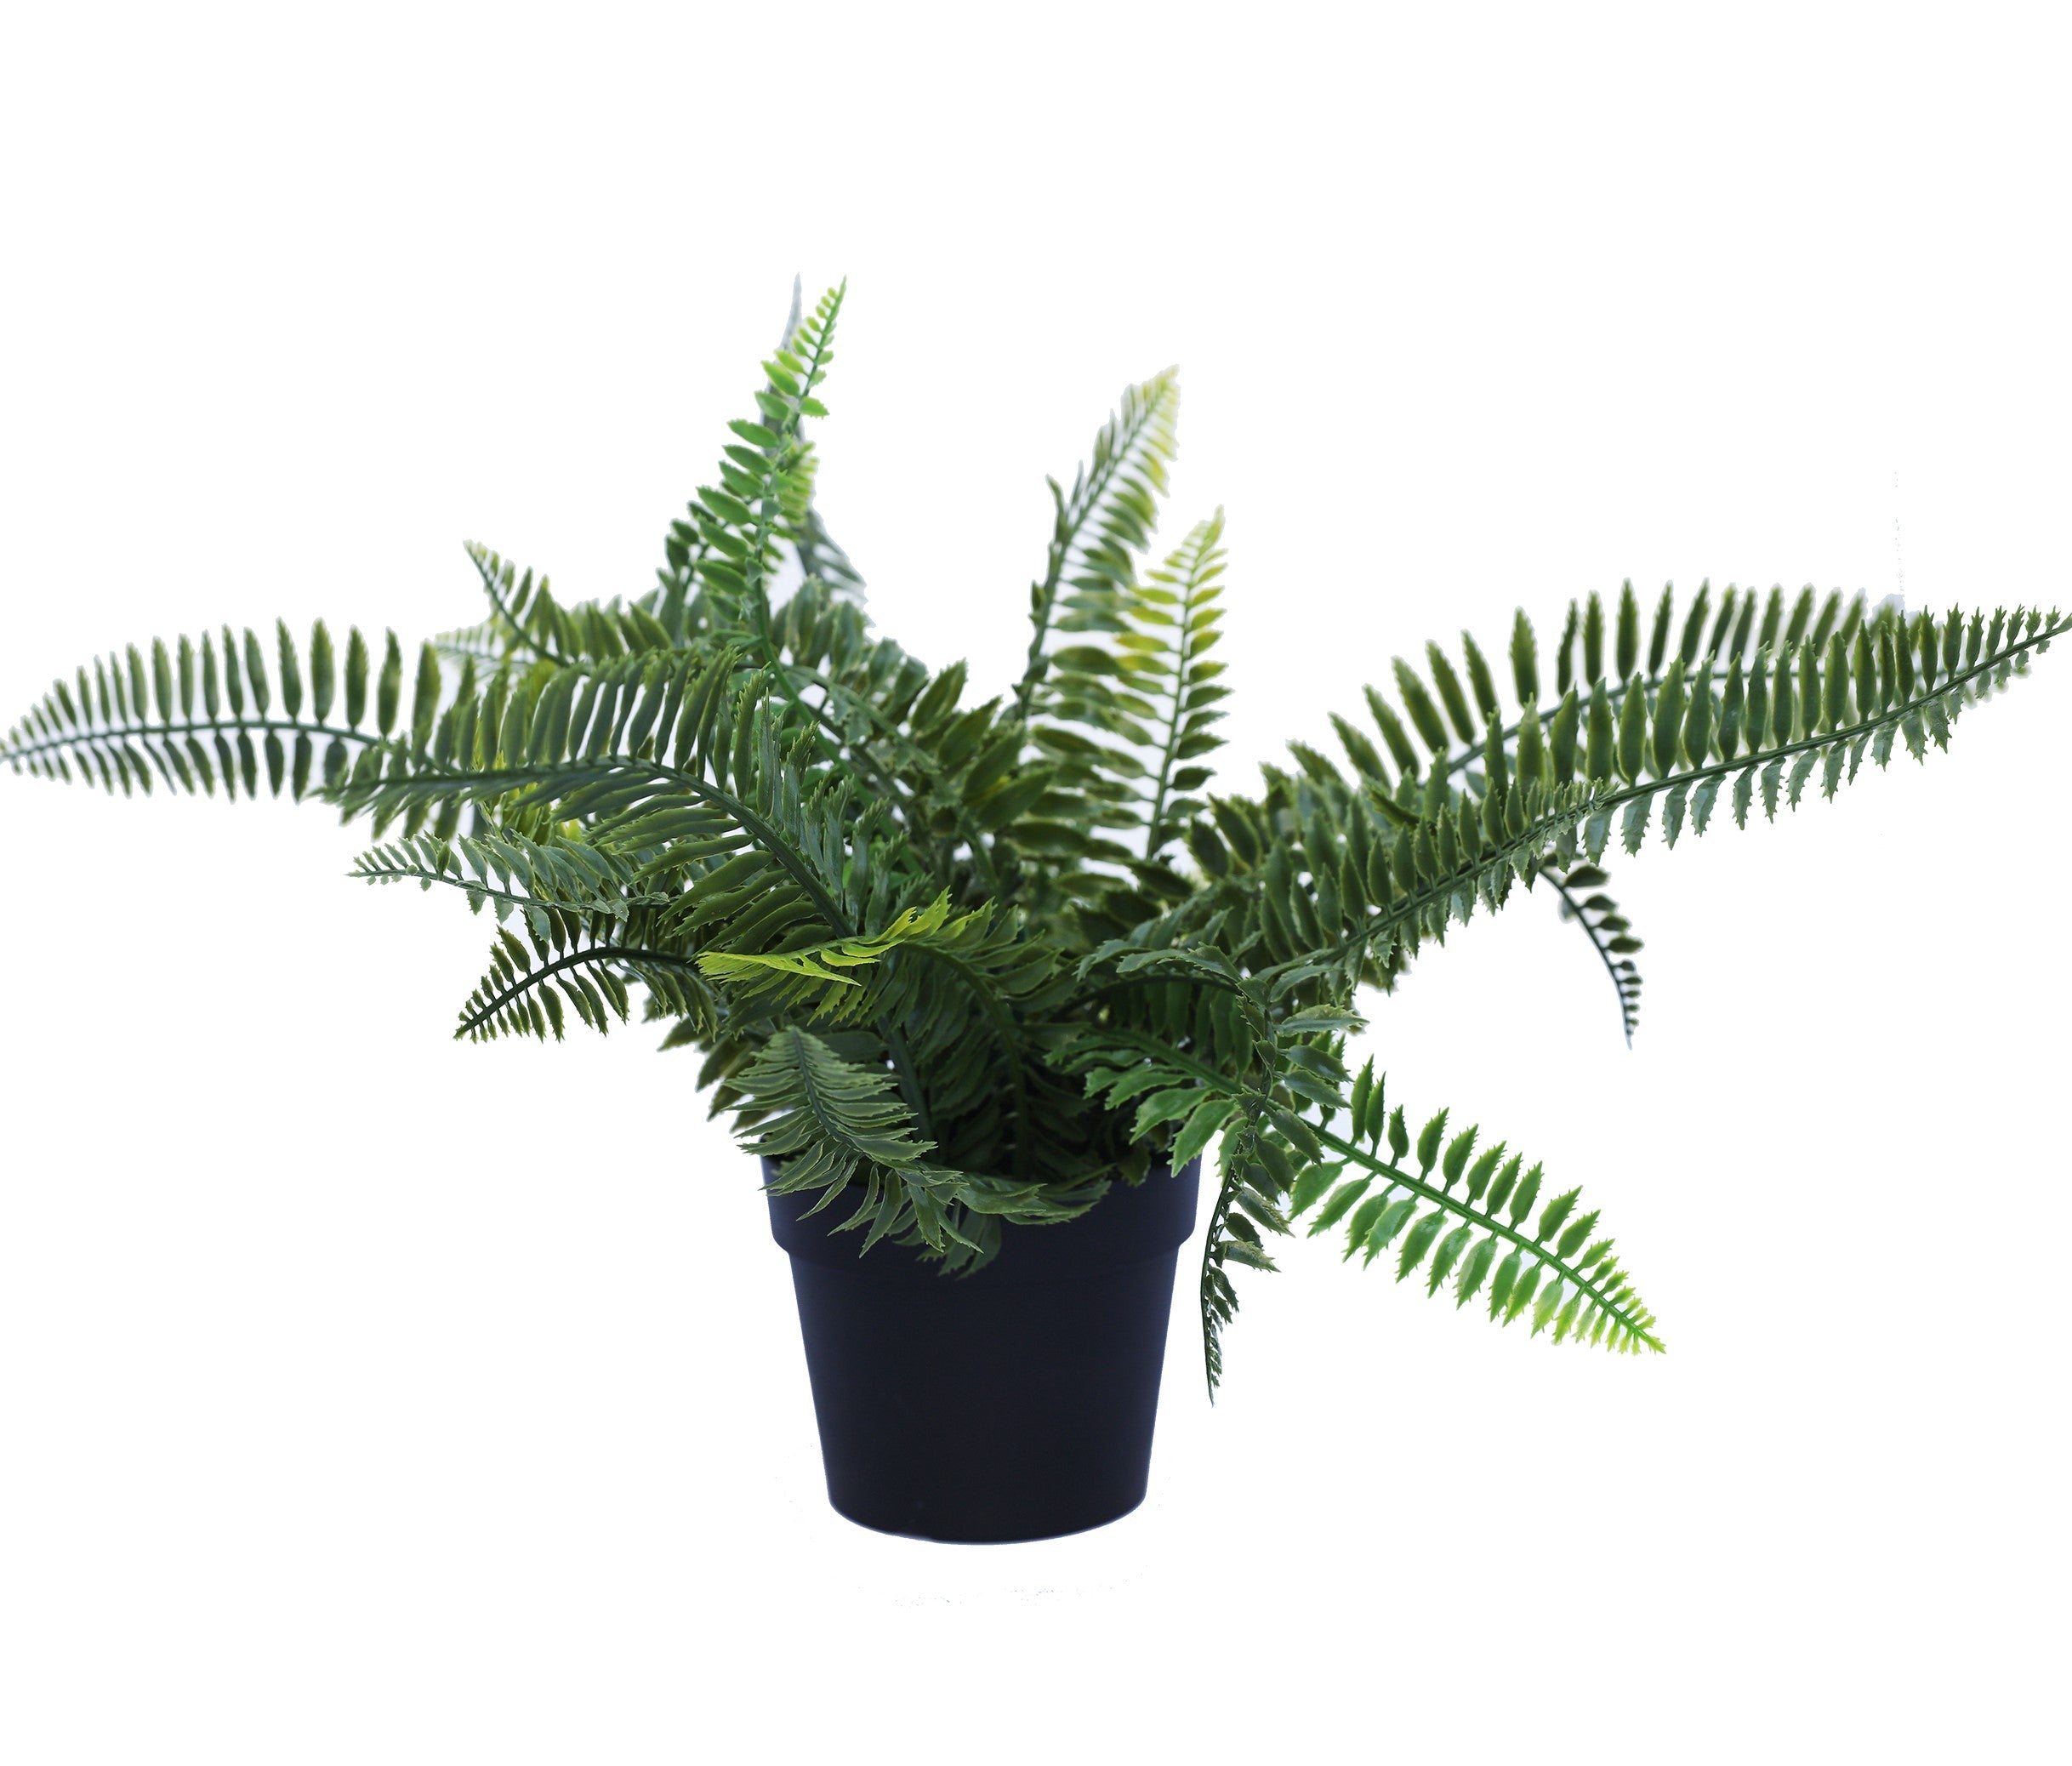 Small Potted Artificial Dark Green Fern Plant UV Resistant 20cm - Designer Vertical Gardens Artificial Shrubs and Small plants